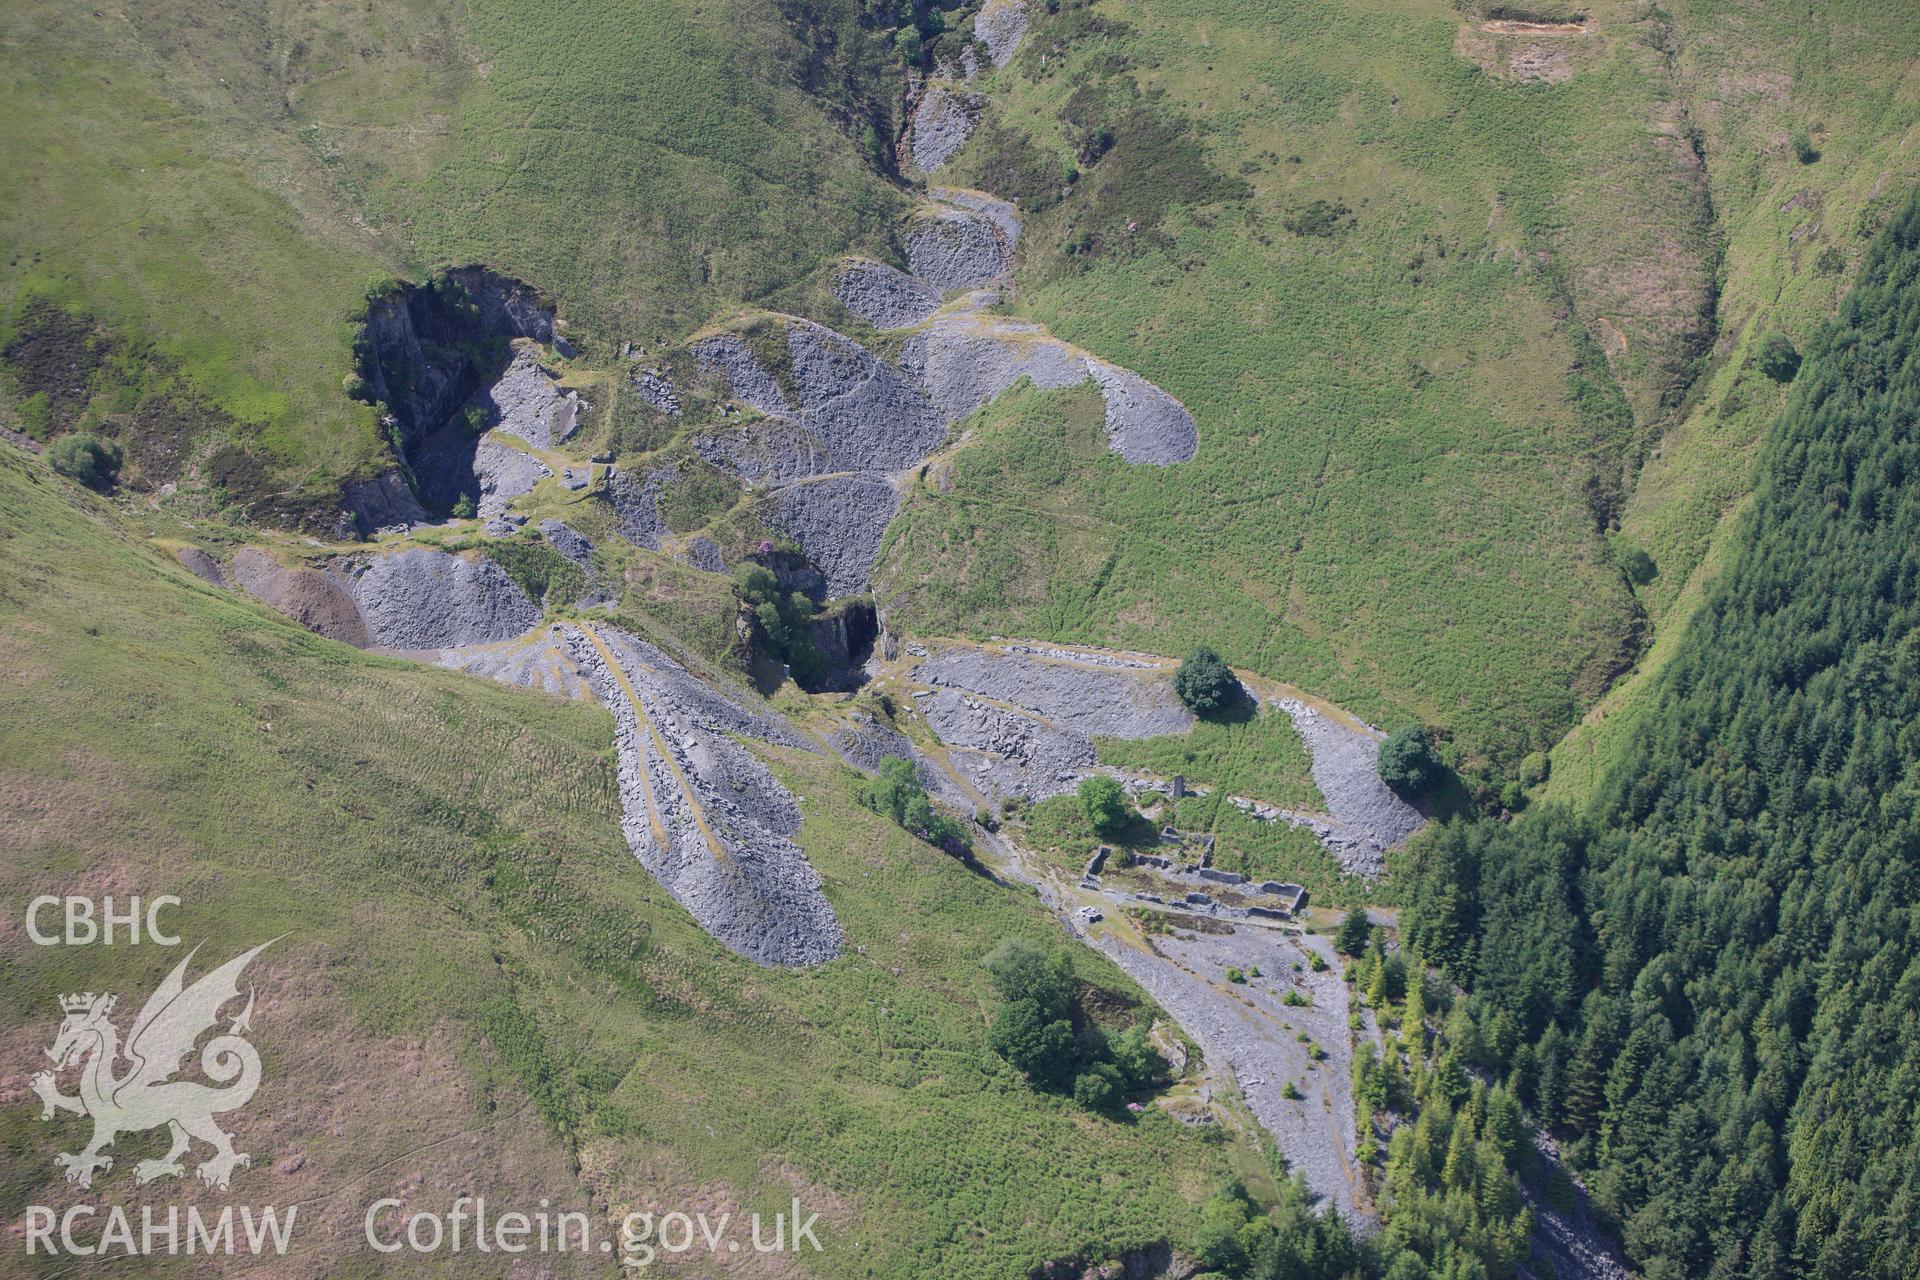 RCAHMW colour oblique photograph of Dinas Mawddwy Slate Quarry. Taken by Toby Driver on 16/06/2010.